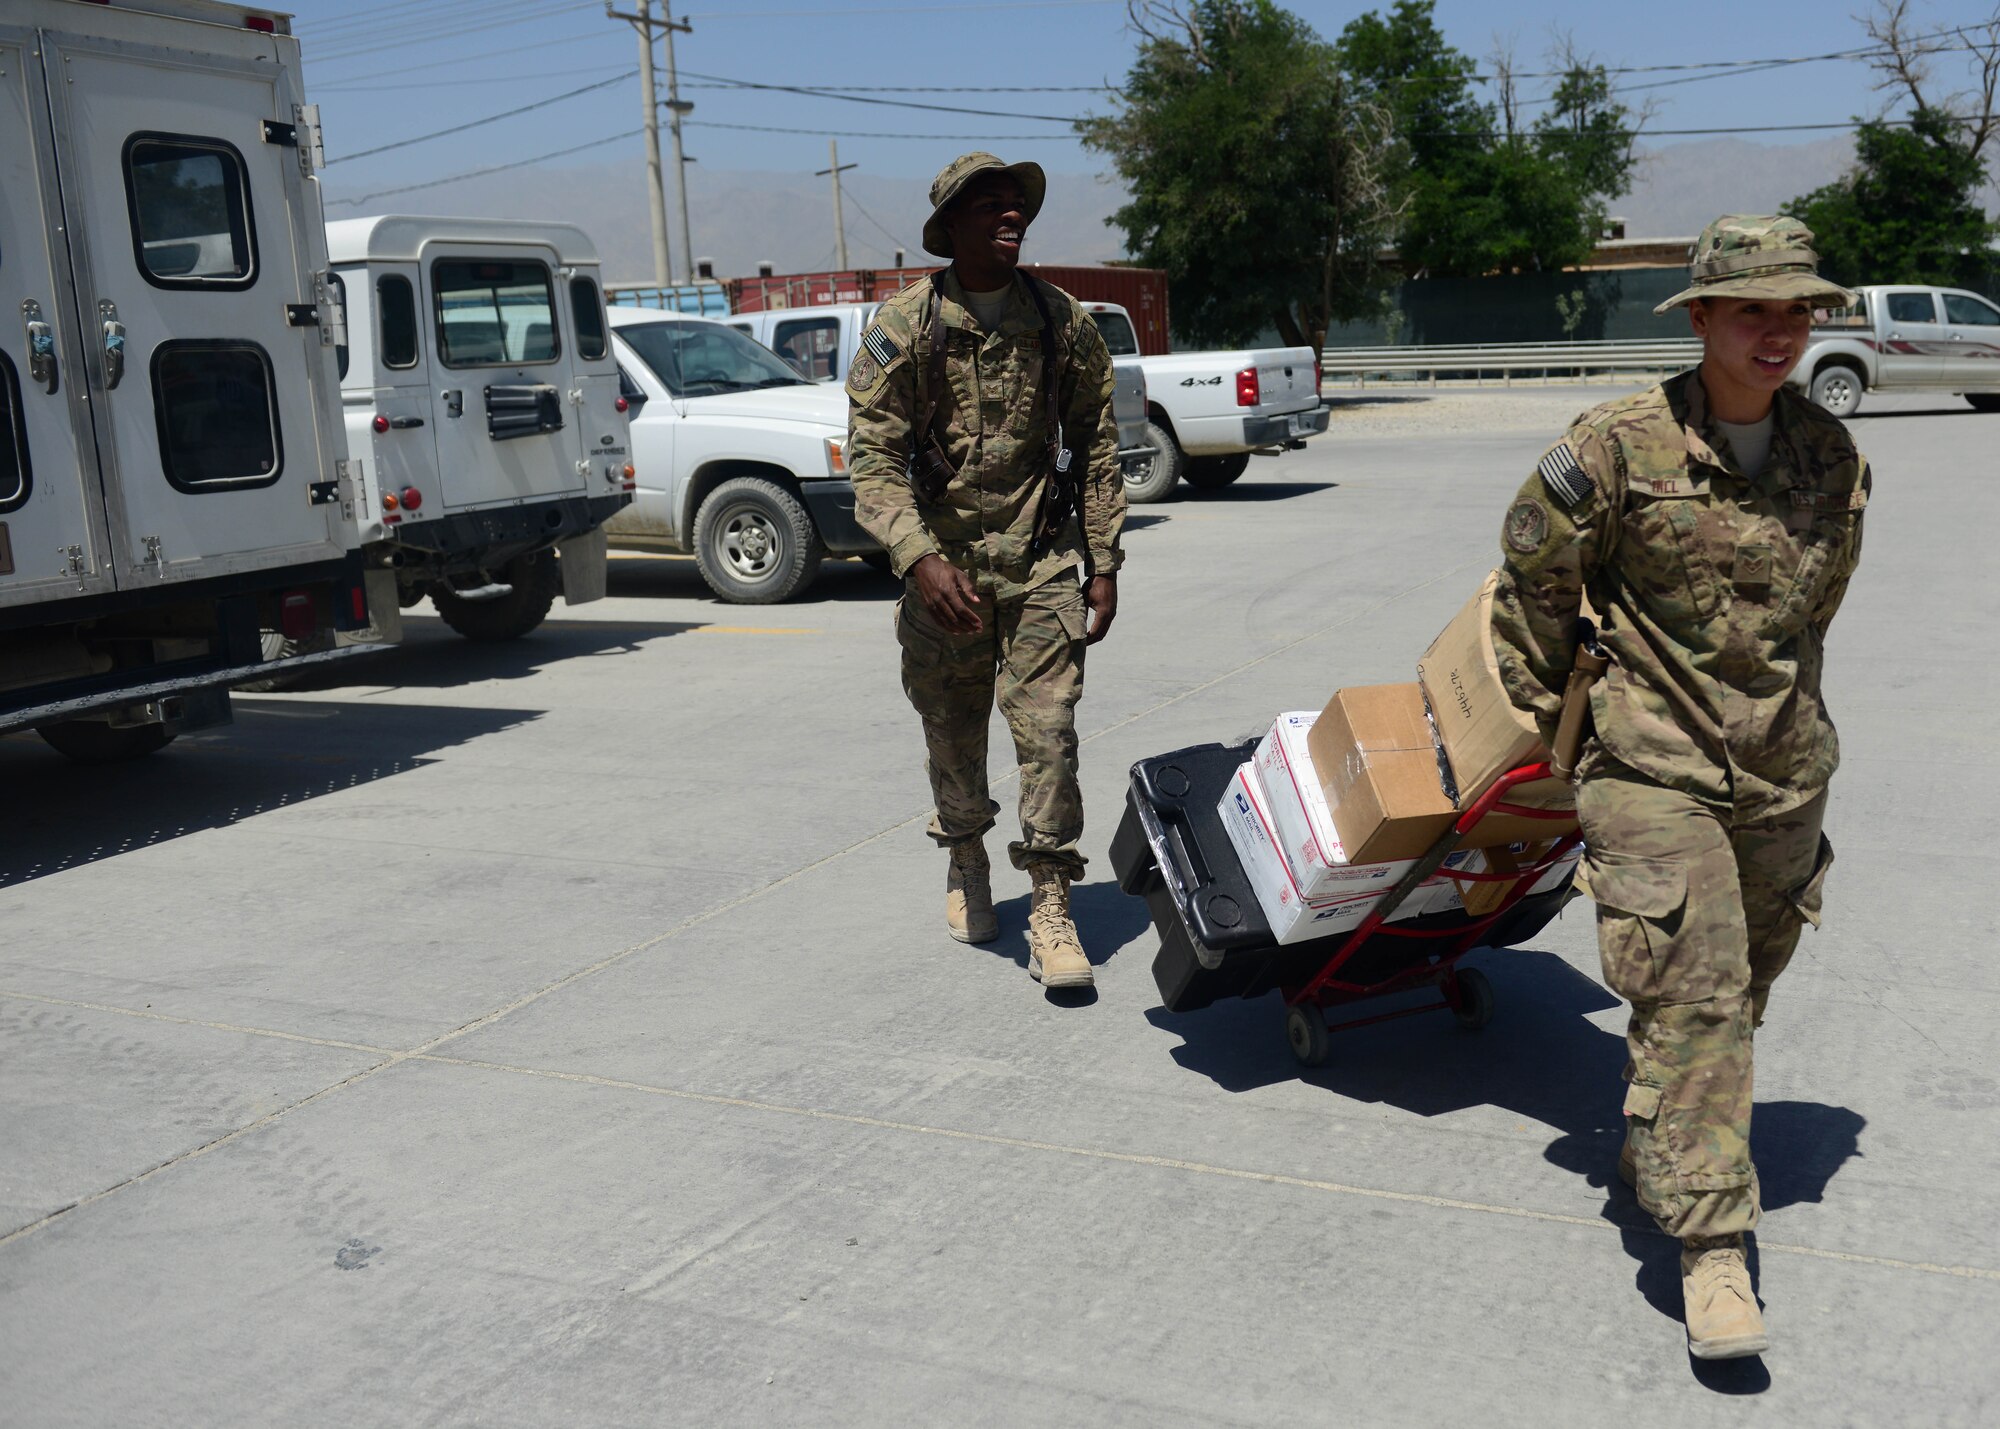 (From left) U.S. Air Force Senior Airmen Lorenza Kates and Victoria Hill, 455th Expeditionary Communications Squadron mail clerks deliver mail at Bagram Airfield, Afghanistan June 26, 2014.  Kates and Hill are responsible for handling mail for Airmen in the 455th Air Expeditionary Wing. They handle thousands of packages and letters per month.  Kates is deployed from Davis Monthan Air Force Base, Ariz. and a native of Dublin, Ga. Hill is deployed from Whiteman Air Force Base, Mo. and a native of Blanchard, La.  (U.S. Air Force photo by Staff Sgt. Evelyn Chavez)